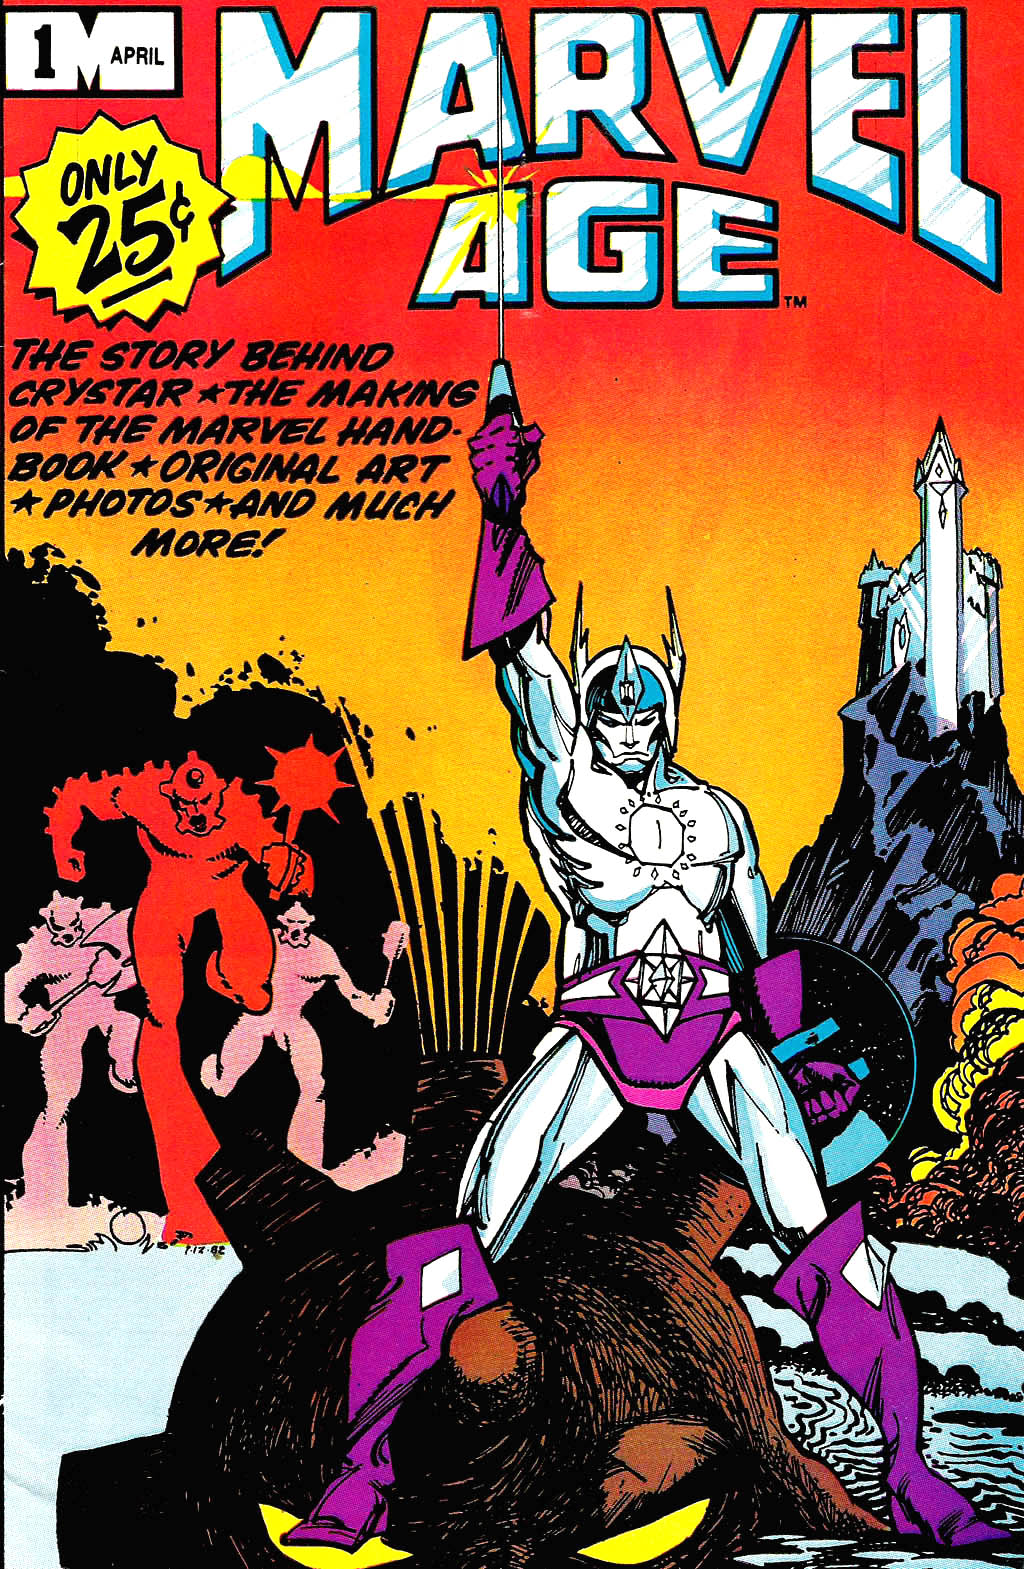 Read online Marvel Age comic -  Issue #1 - 1